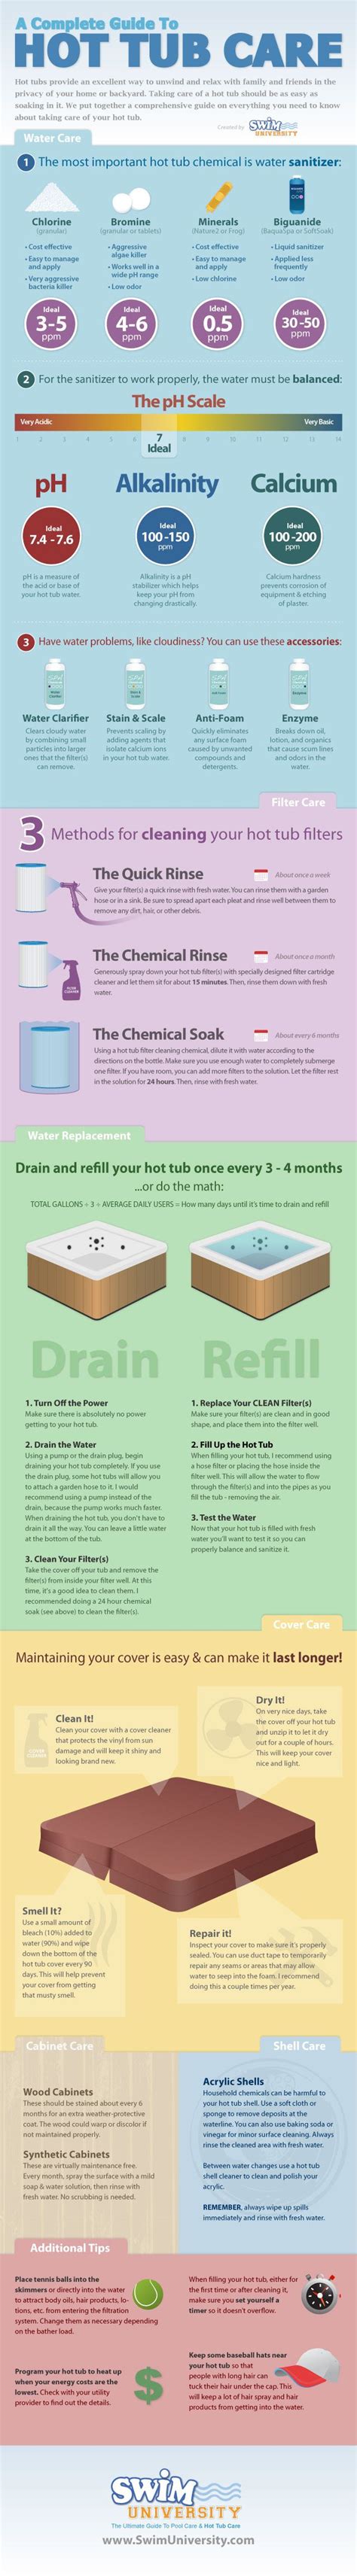 Fill the bathtub with hot water (max. Hot Tub Care (With images) | Hot tub backyard, Hot tub ...